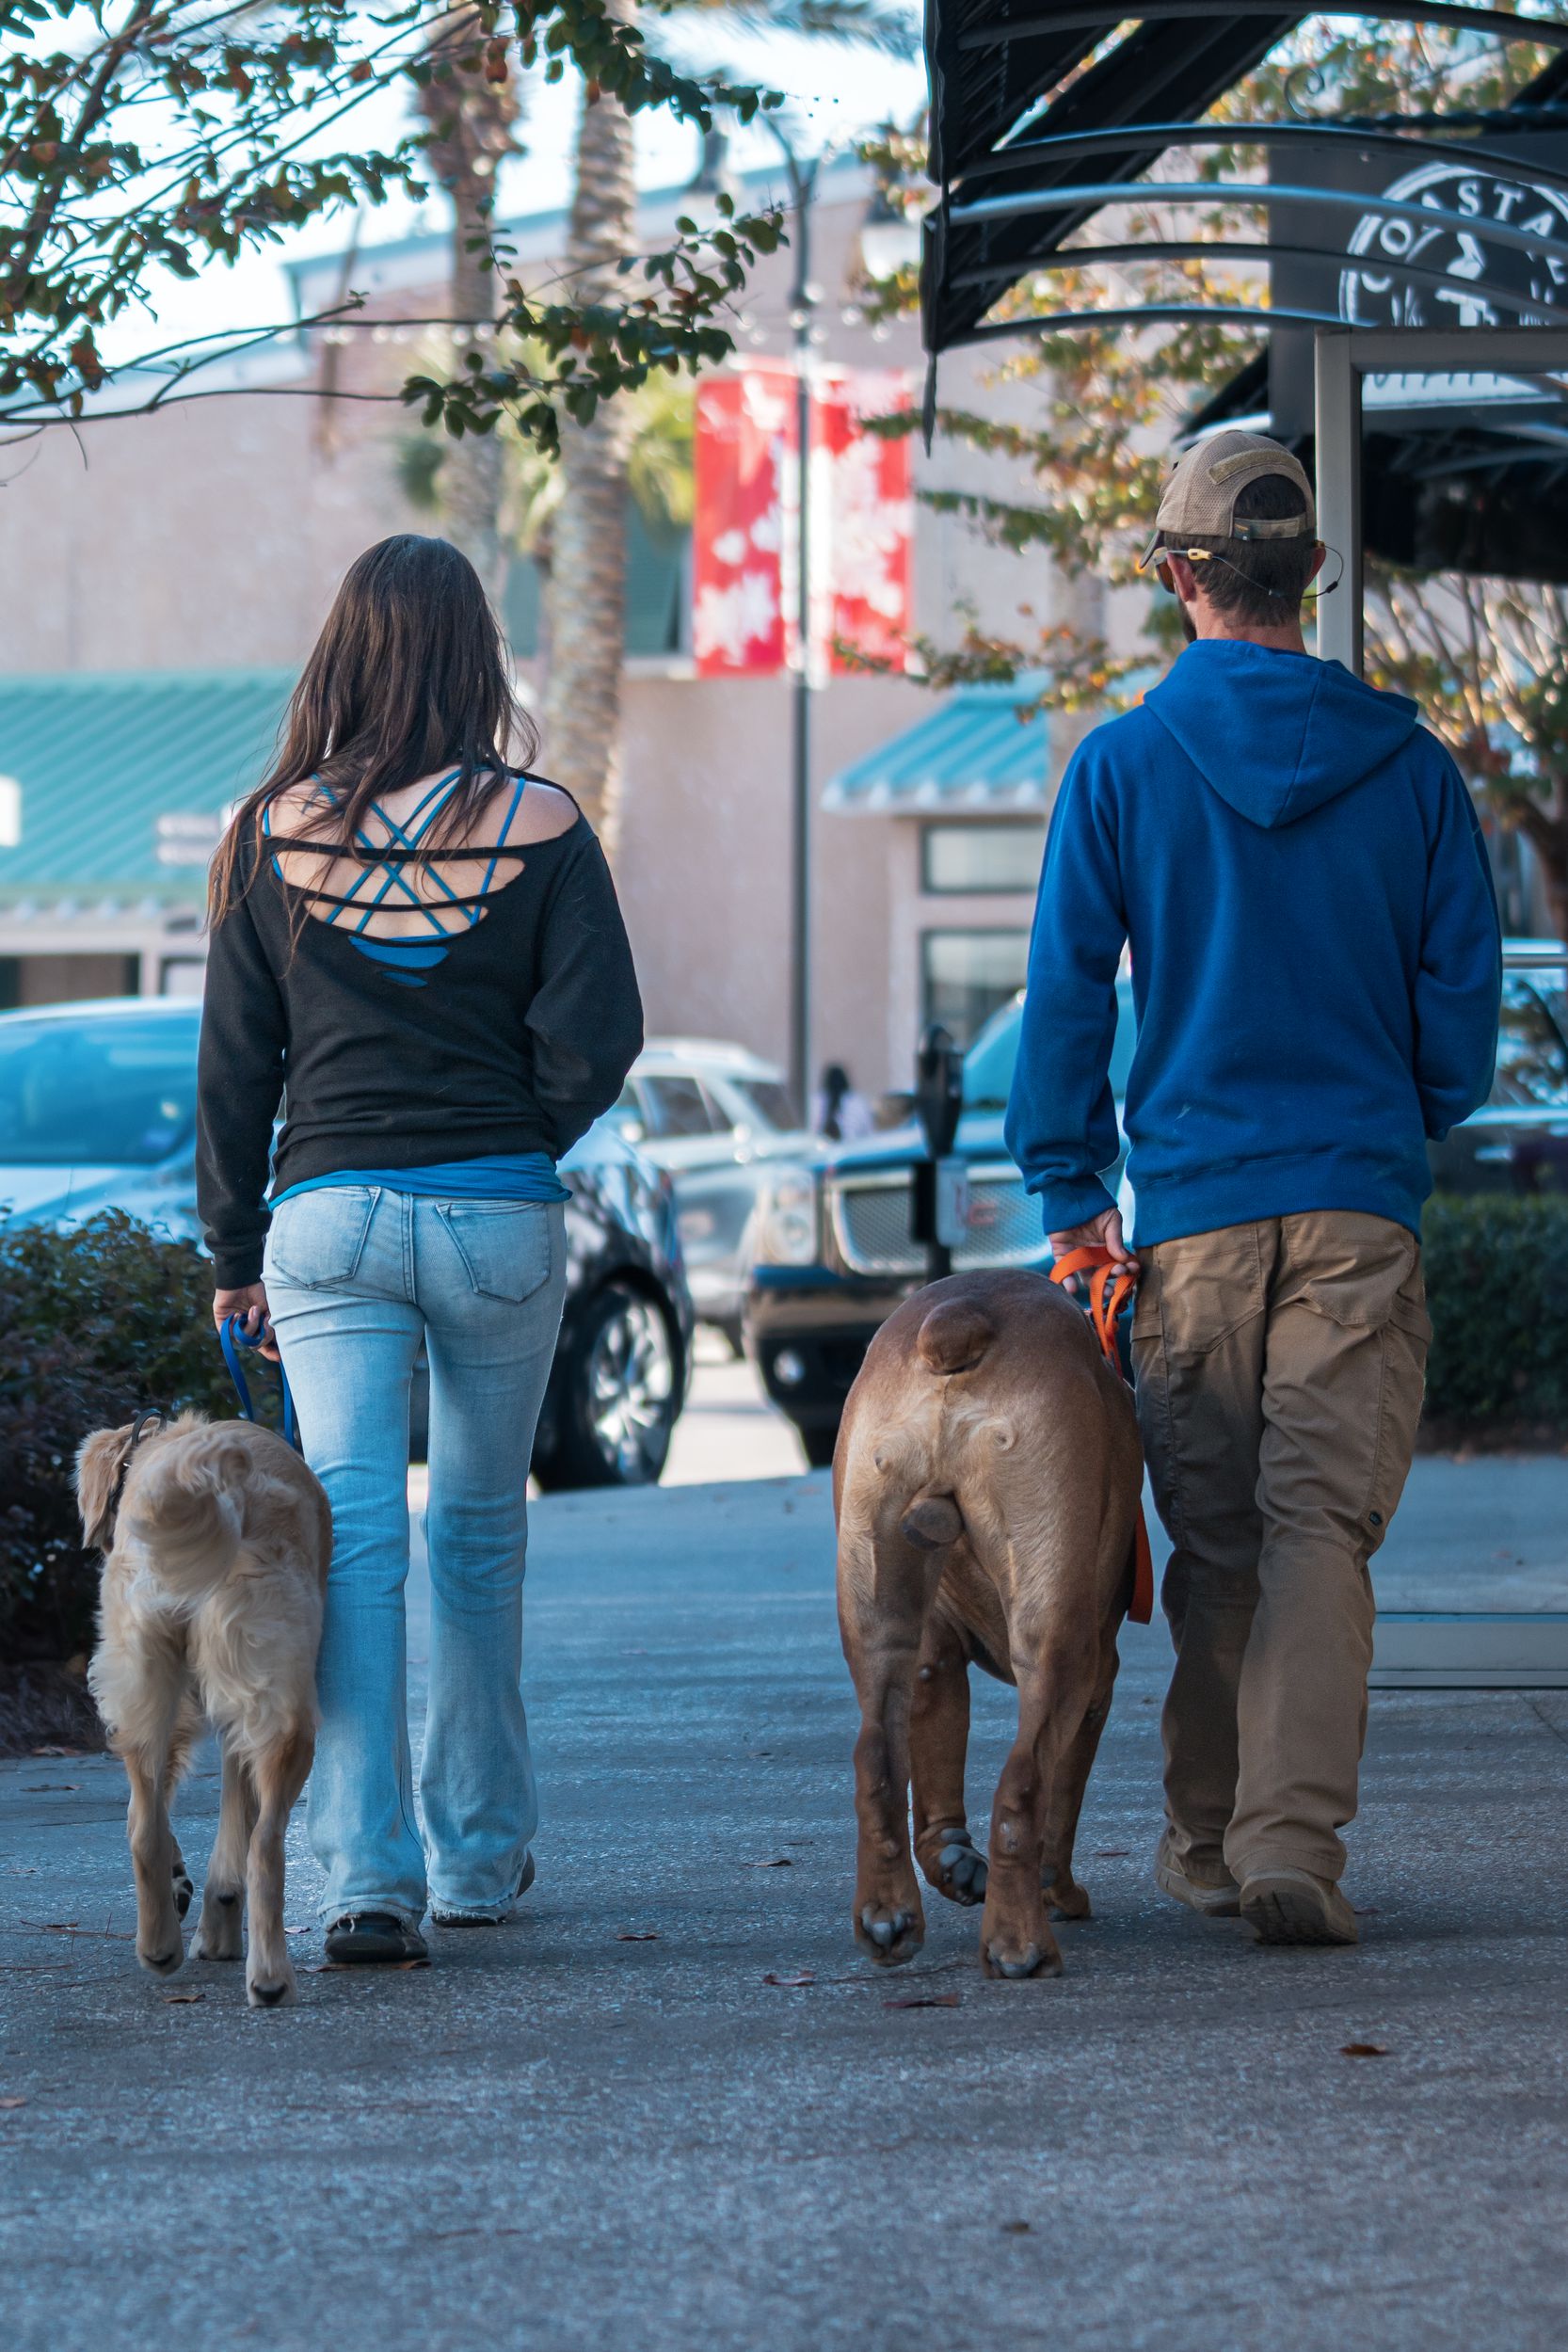 A woman and man walking two dogs on leashes